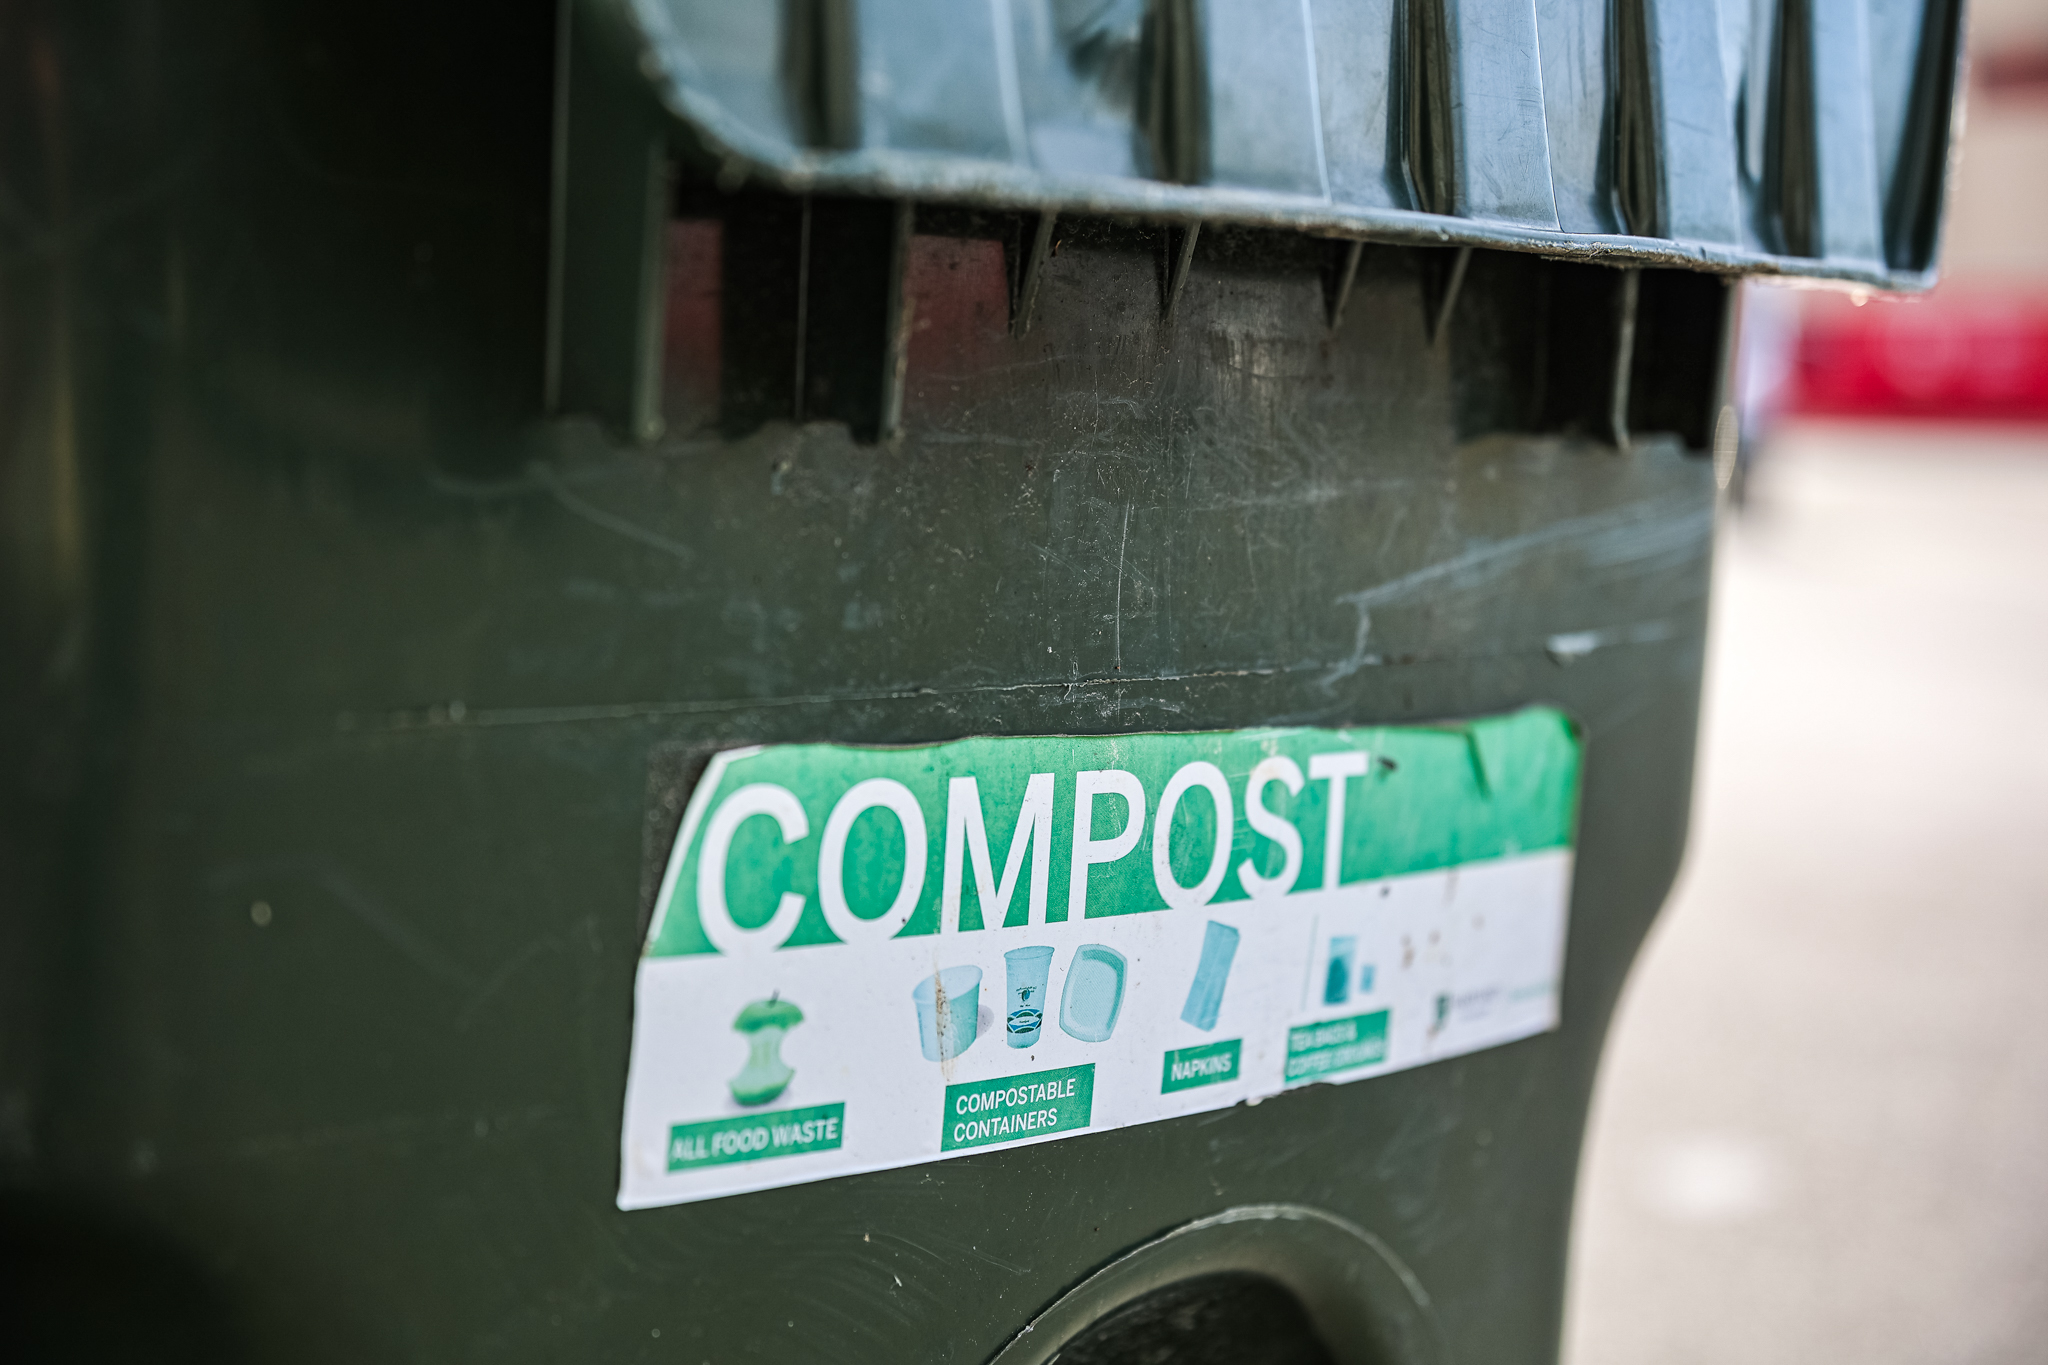 Compost sign with symbols and text for food, compostable containers, and other items.